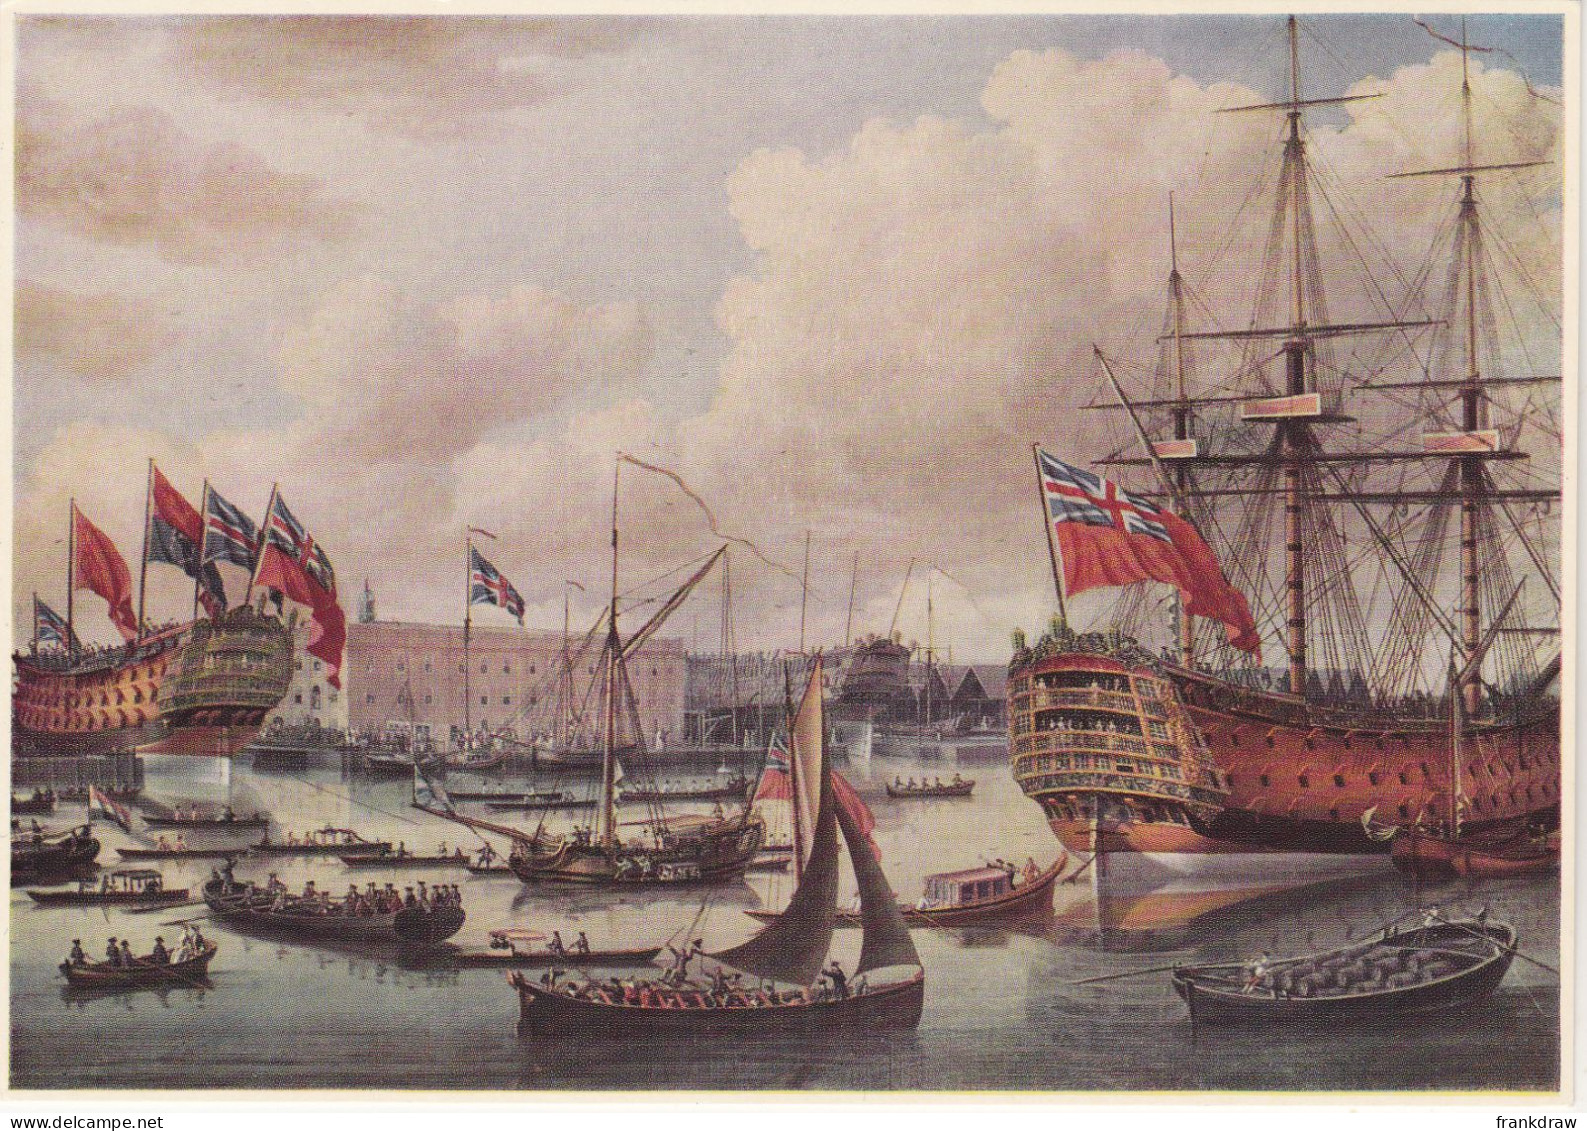 Postcard - Art - John Clevelley - The Launching Of The Cambridge, The Royal George In Foreground - Card No. P.C.888 - VG - Non Classificati